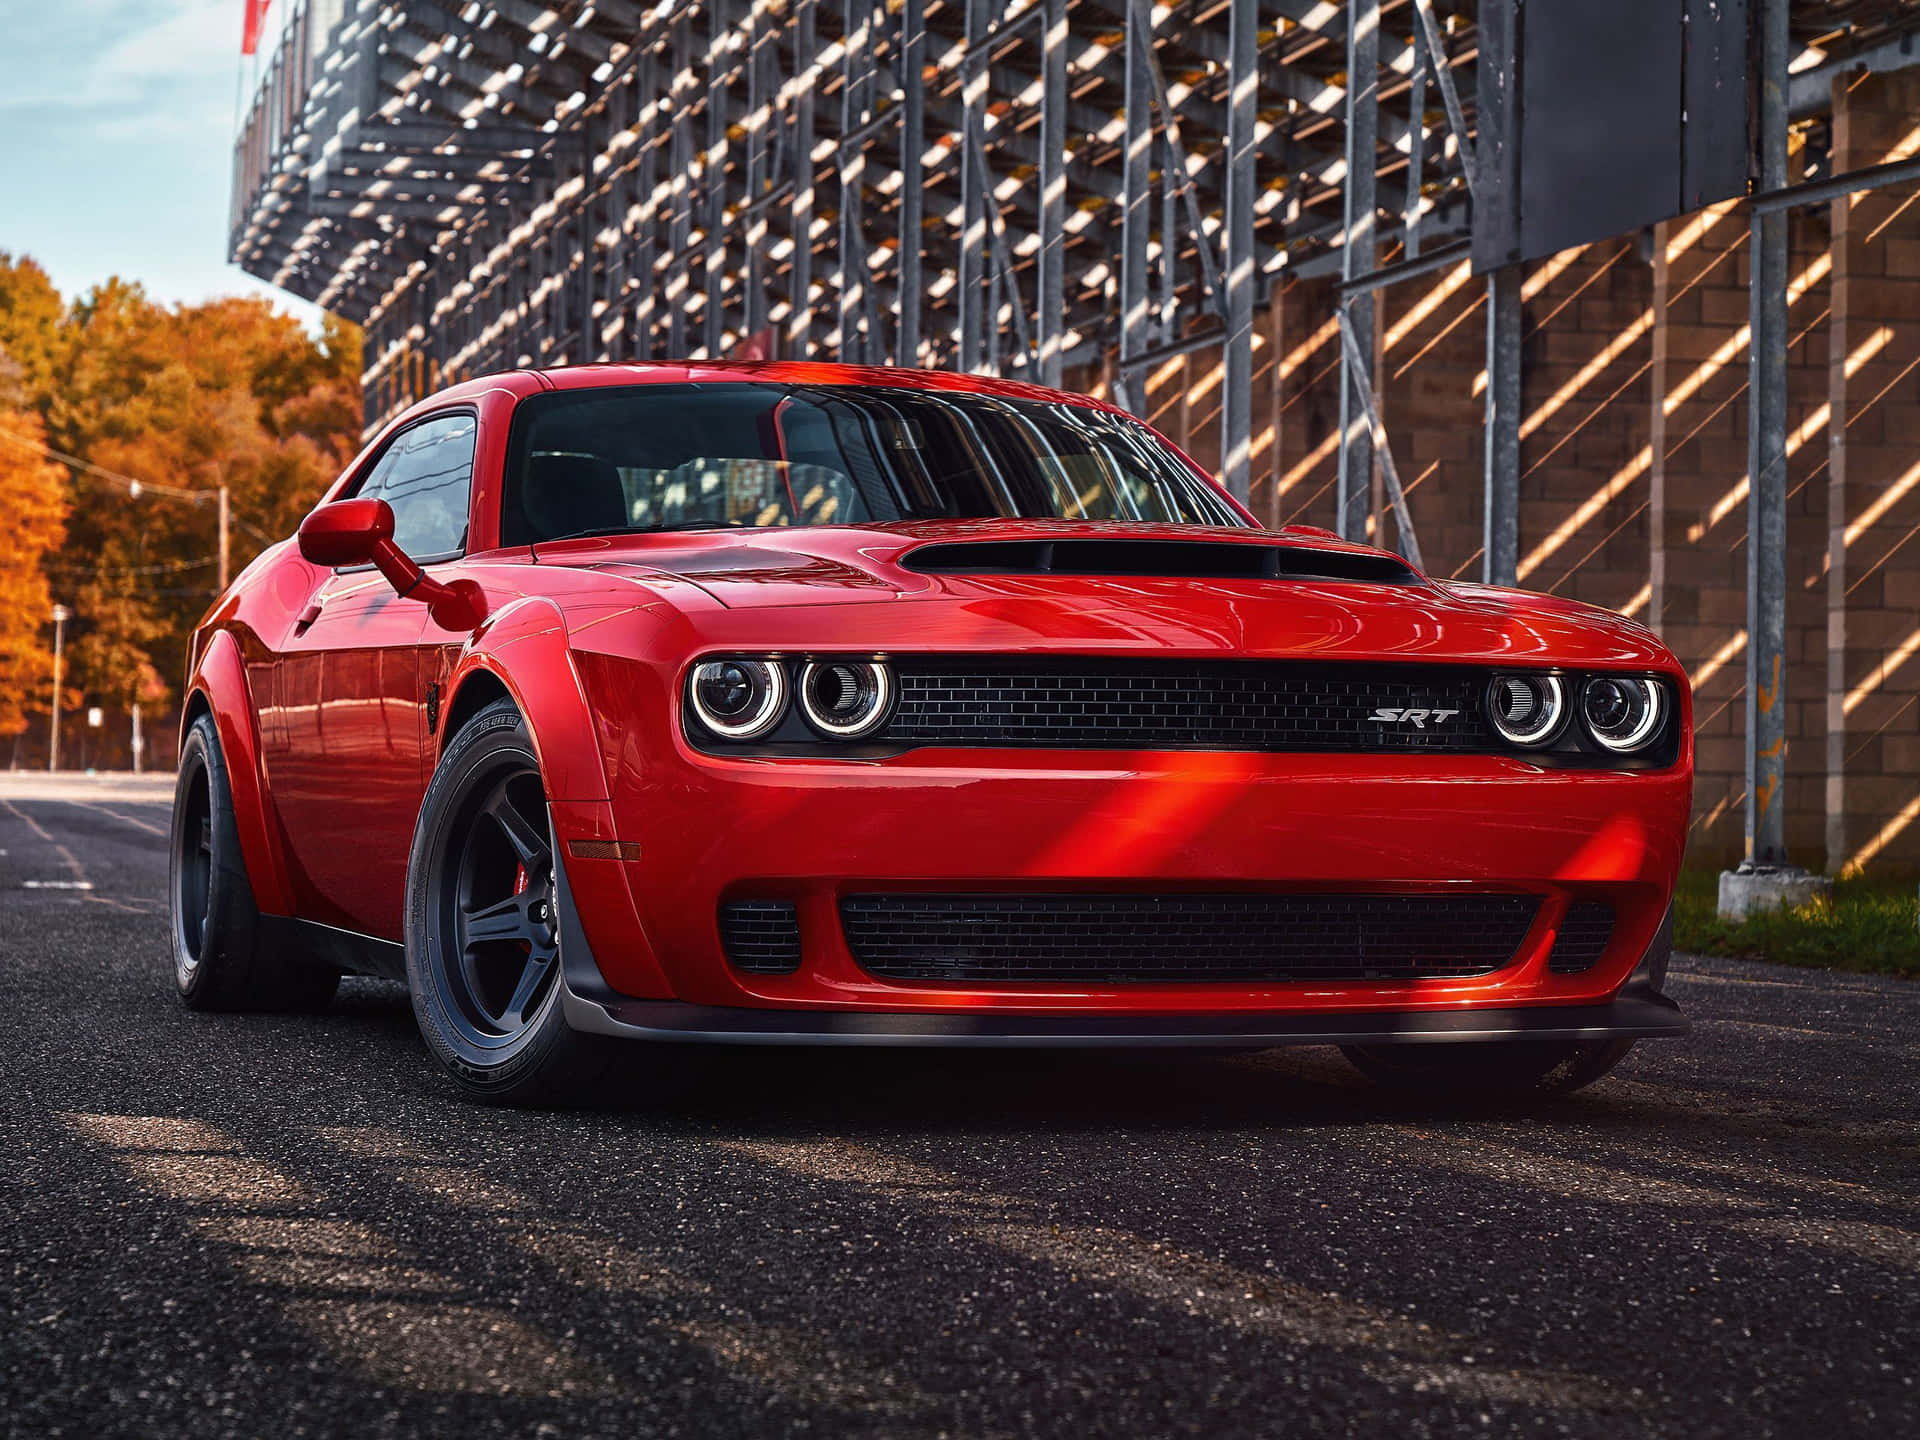 The Iconic Dodge Challenger - Unmistakable Wallpaper